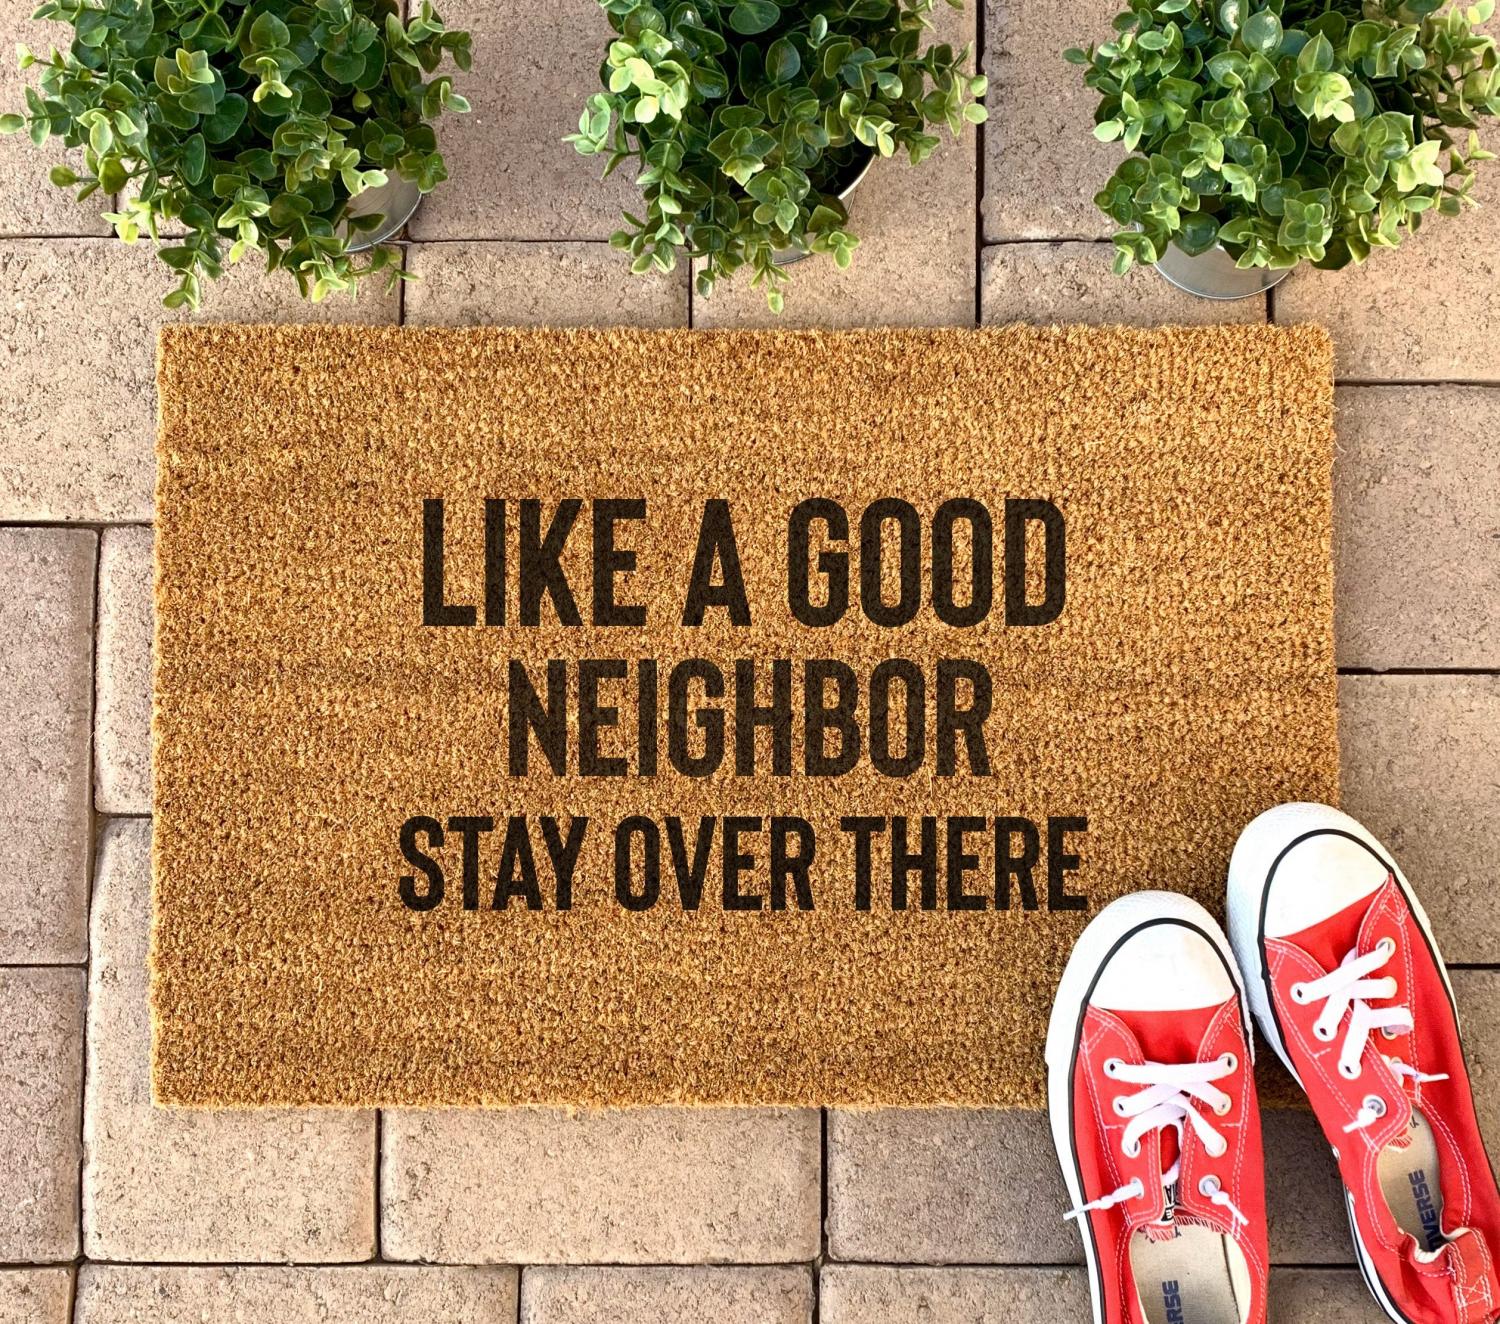 Like a Good Neighbor, Stay Over There Doormat - Funny creative social isolation doormat